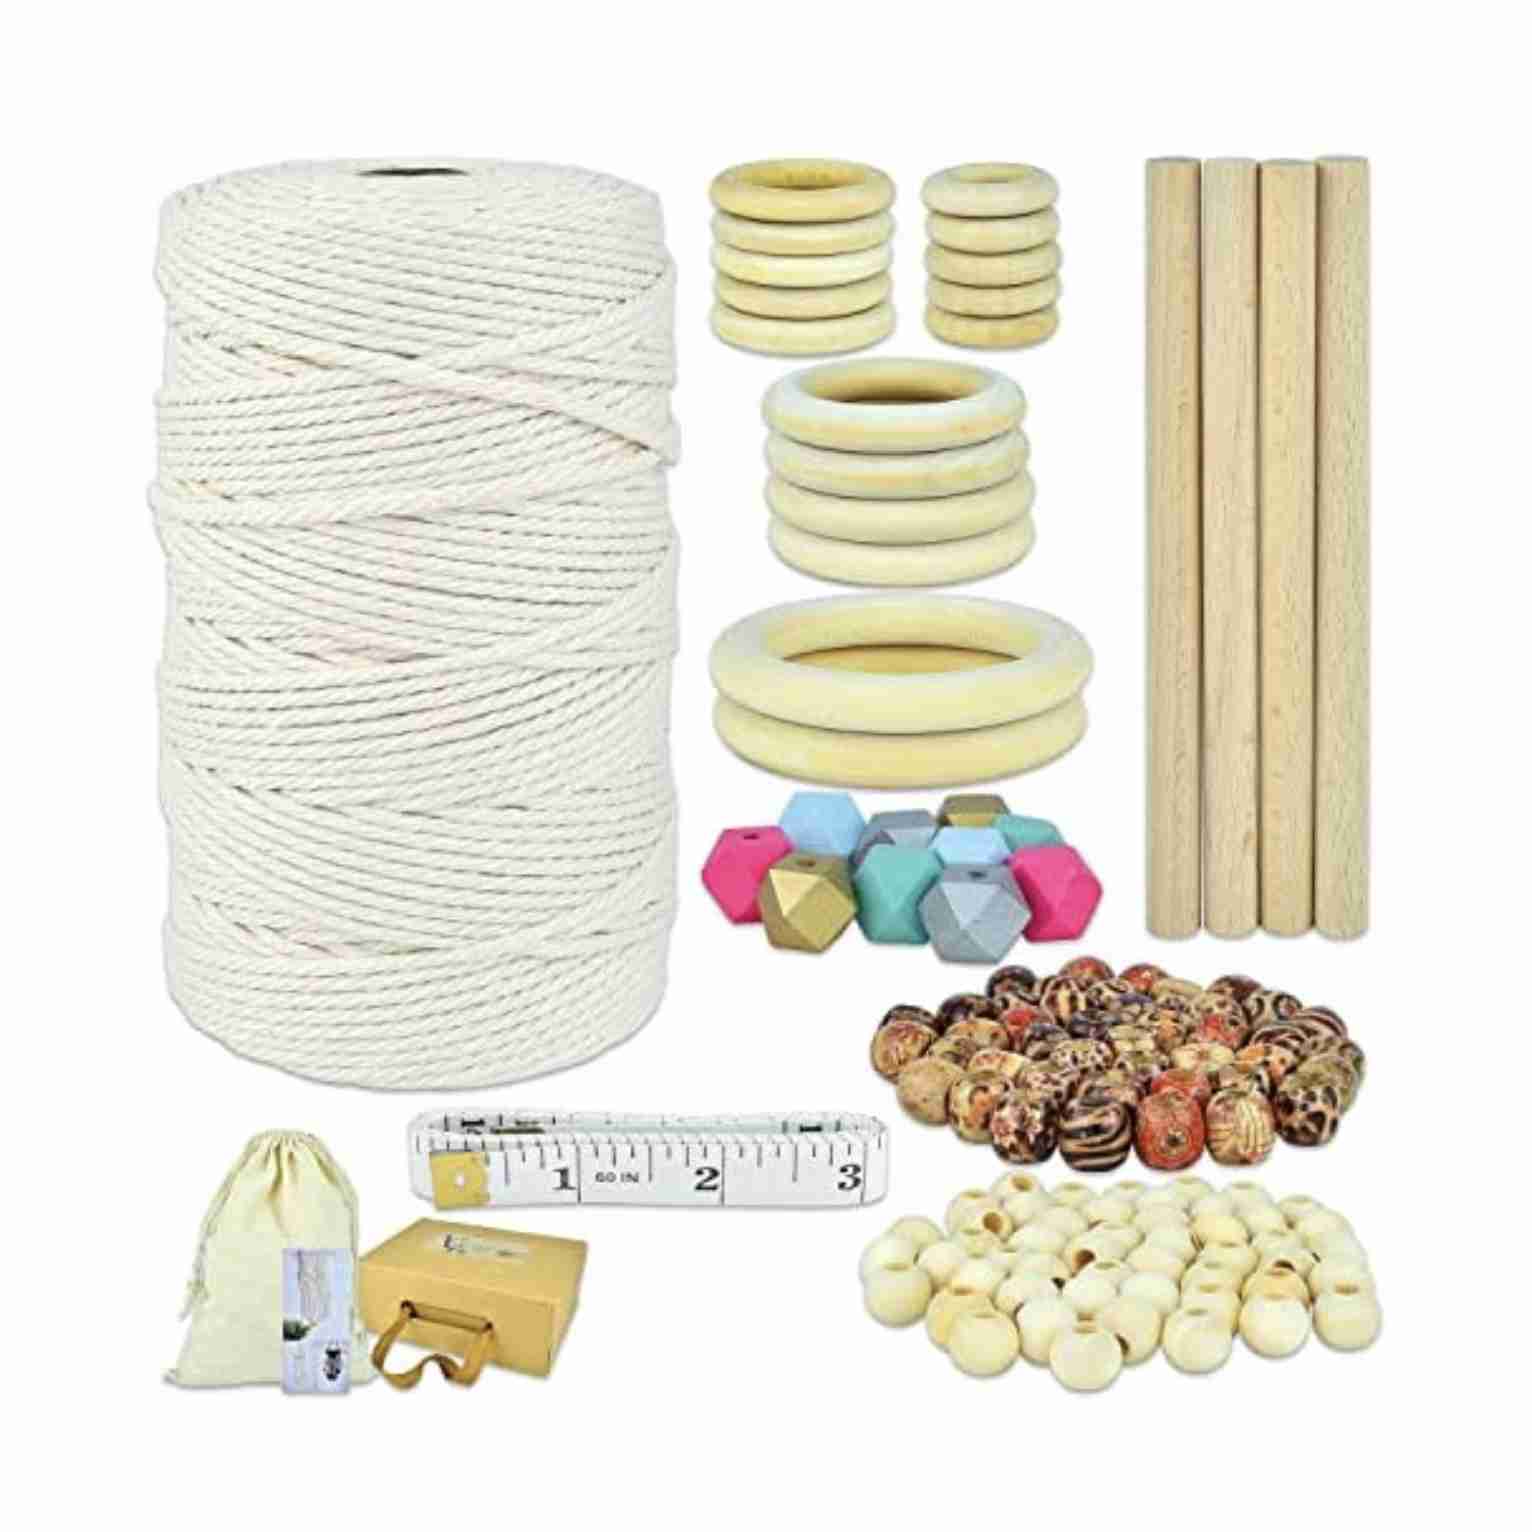 macrame-kits-for-adults-beginners-3mm-x-220yards with cash back rebate